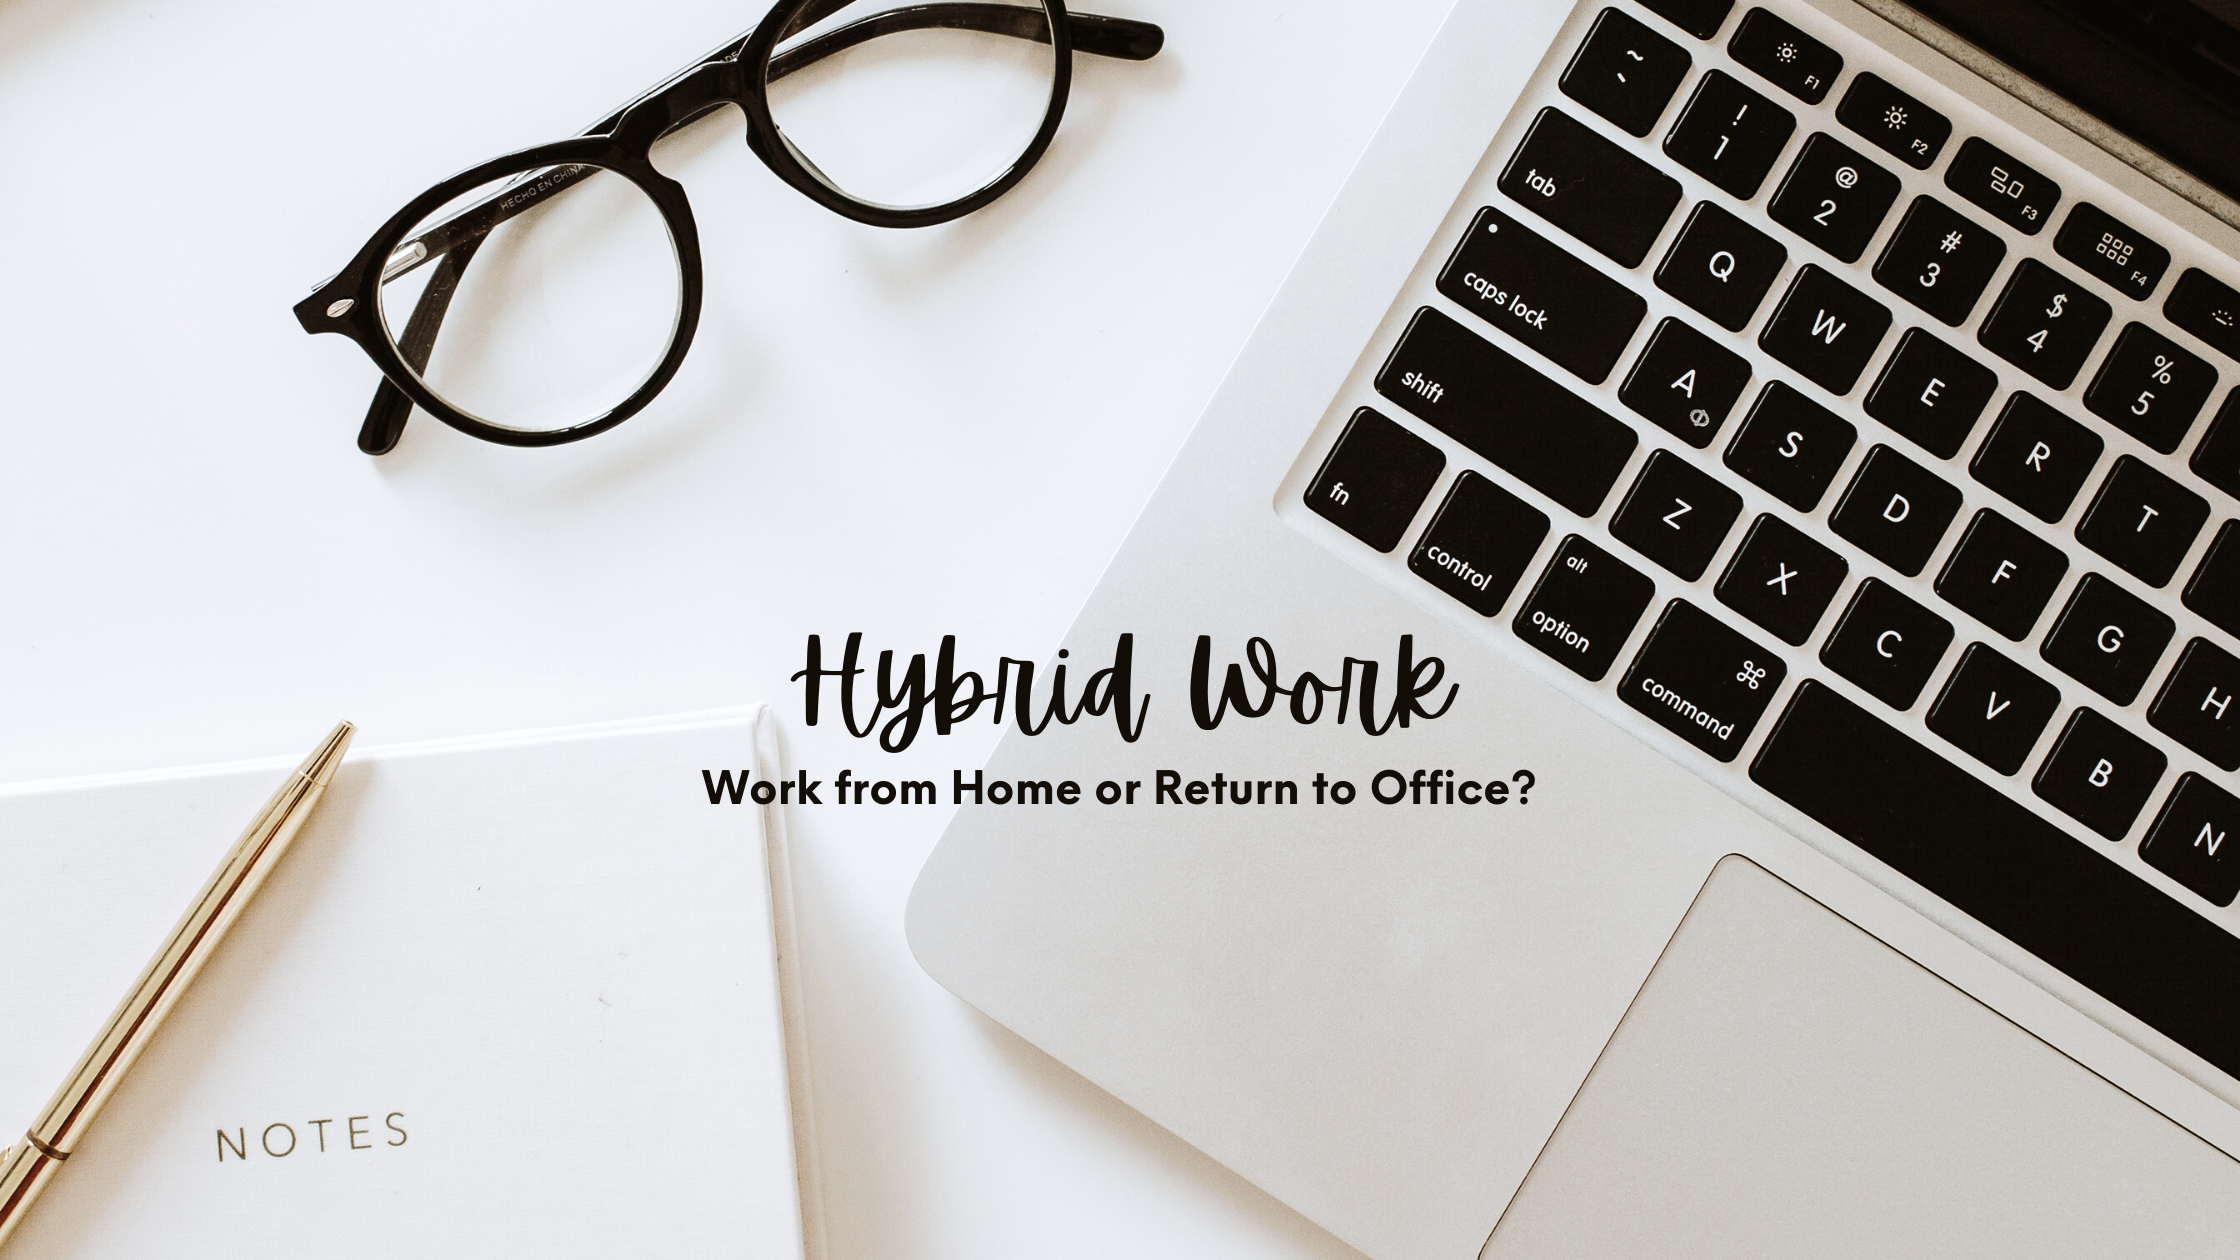 The Future Is Here: Why Organizations Should Adapt a Hybrid Work Model